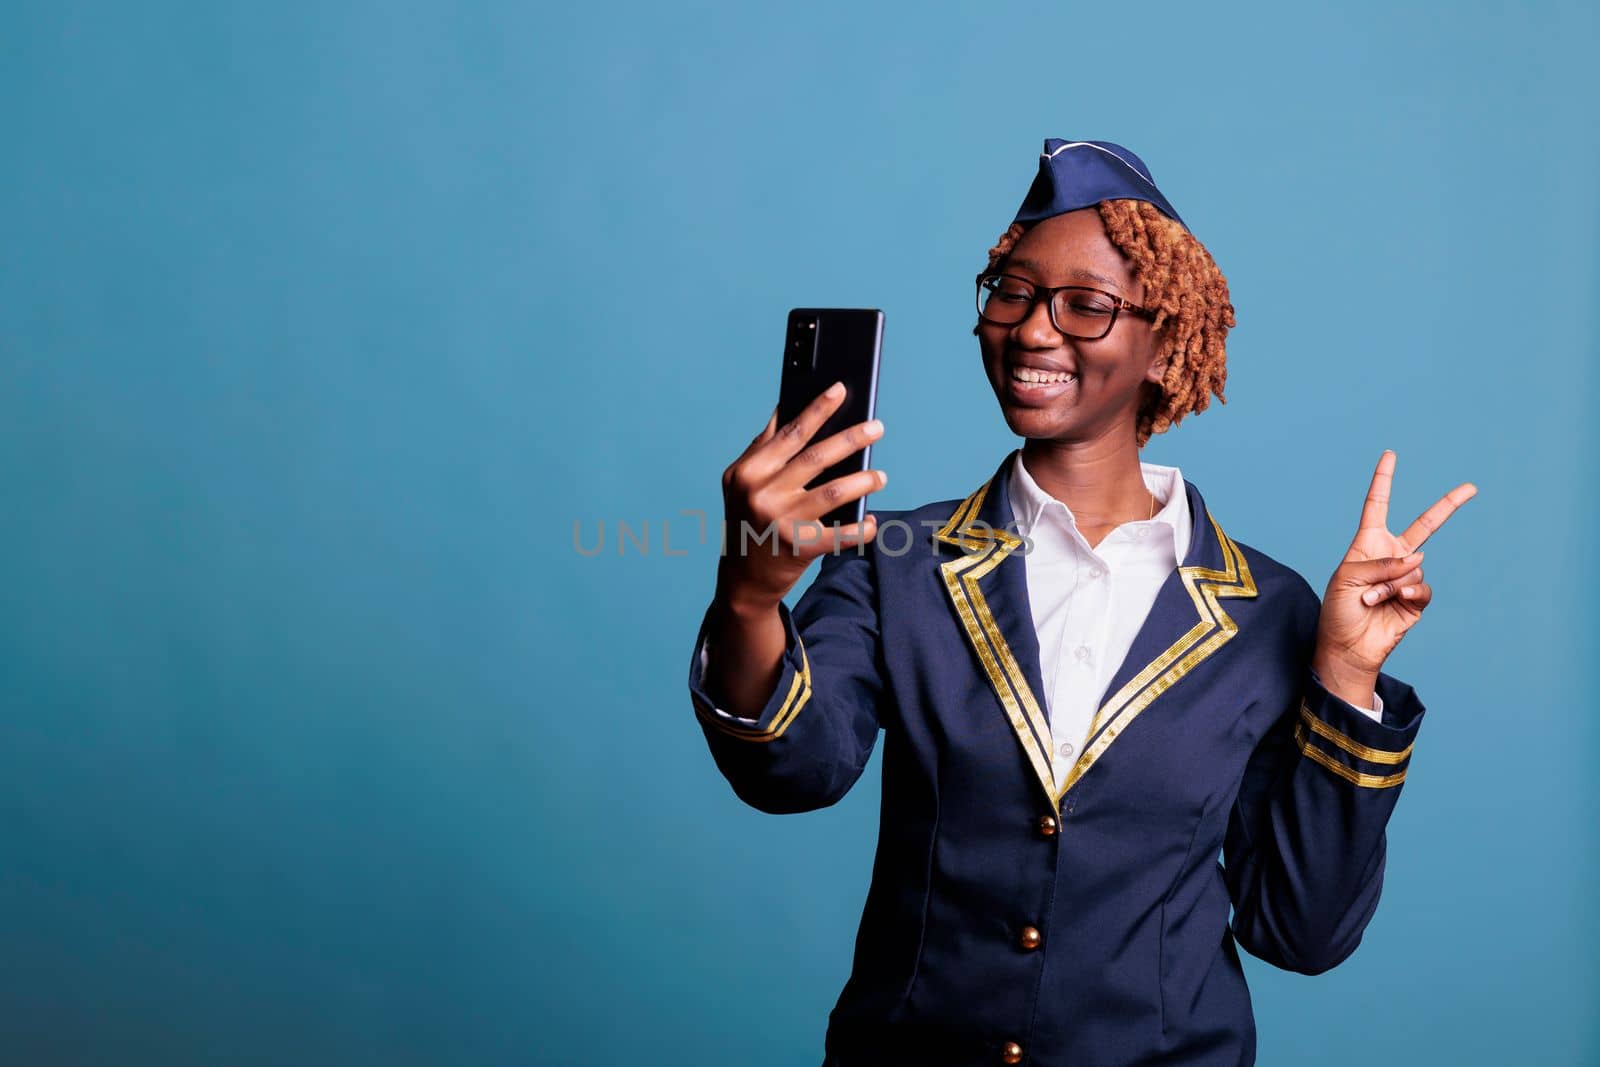 Funny female flight attendant on video call with friends during break time at work. Stewardess dressed in uniform using mobile phone while having fun chatting, studio shot.